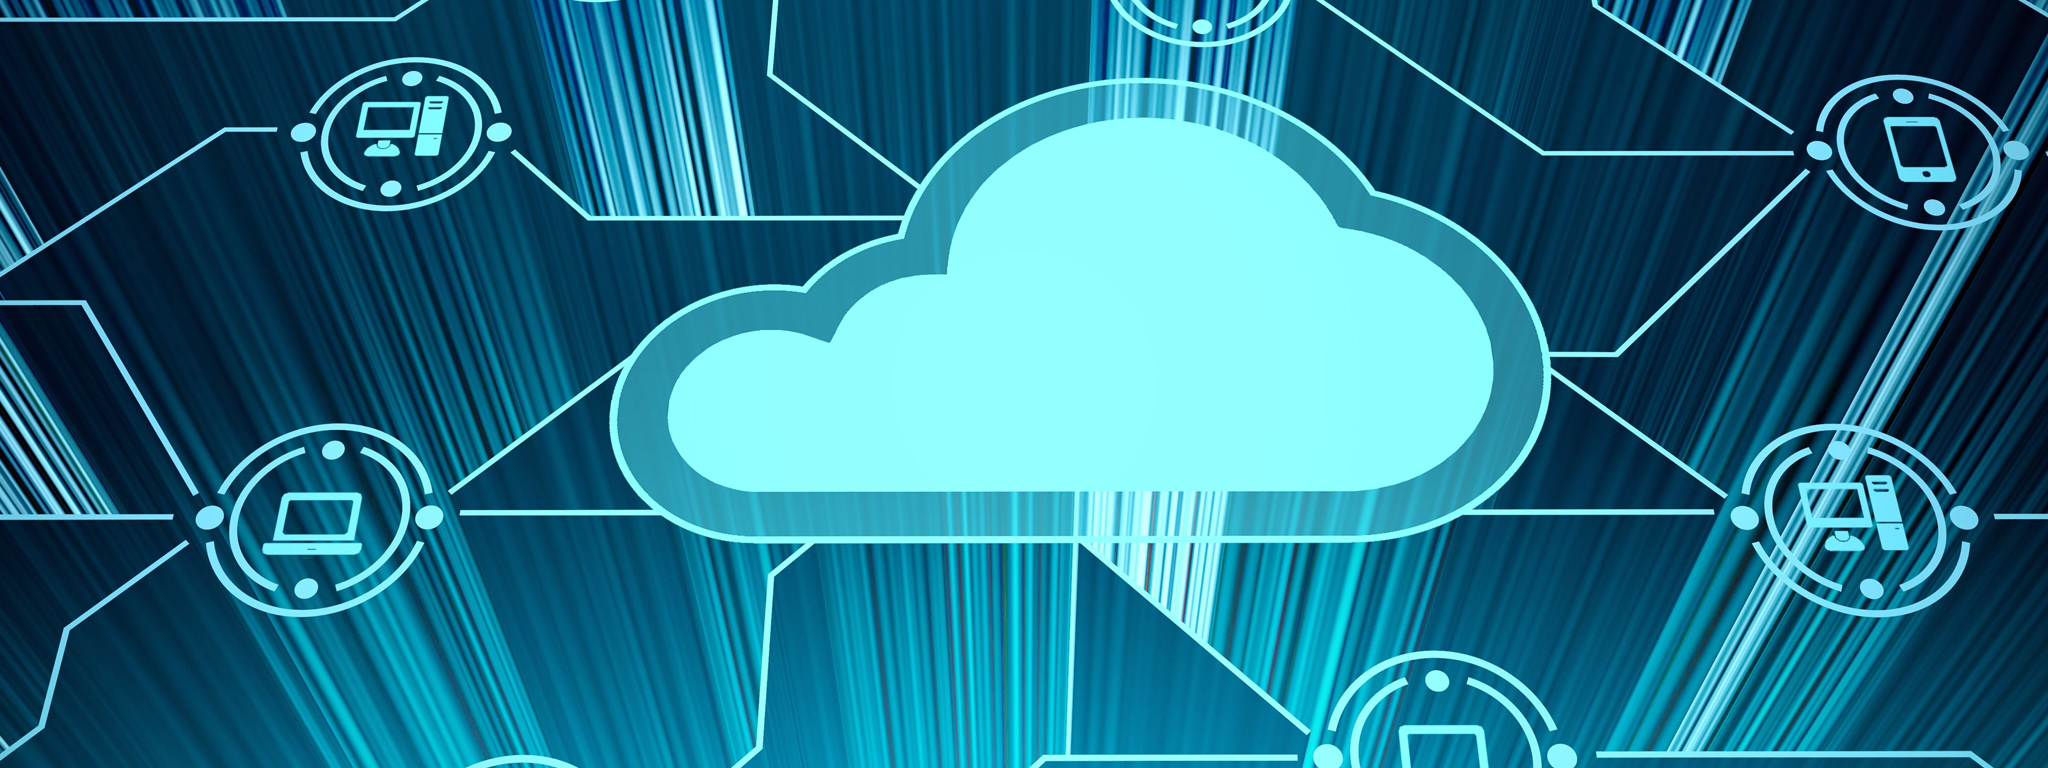 Computer-generated cloud graphic surrounded by device icons to represent desktop, laptop, and mobile devices